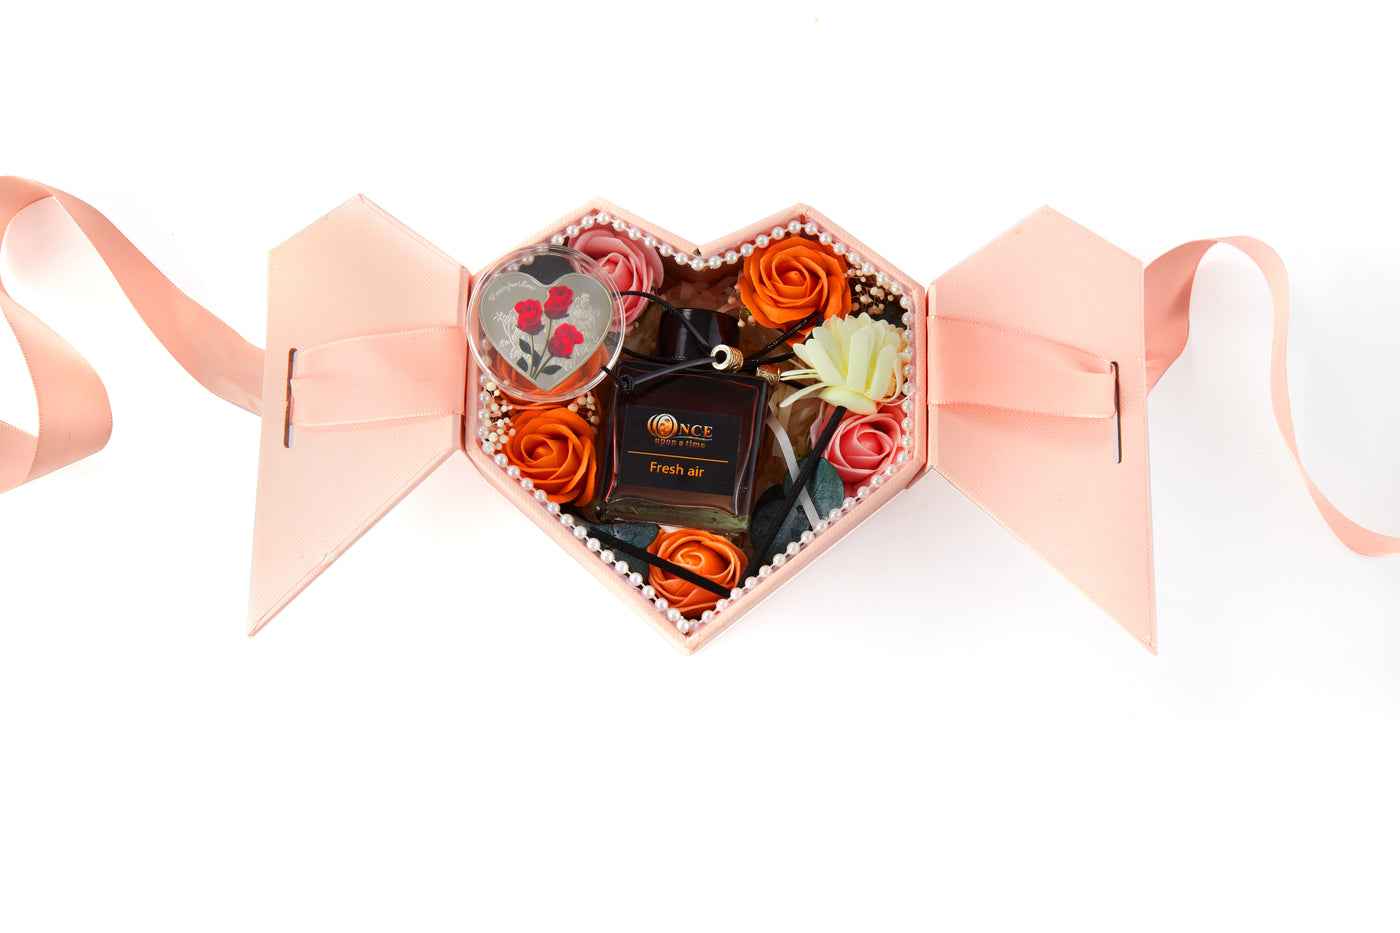 Mothers day gift box, heart-shaped lavender aromatherapy set